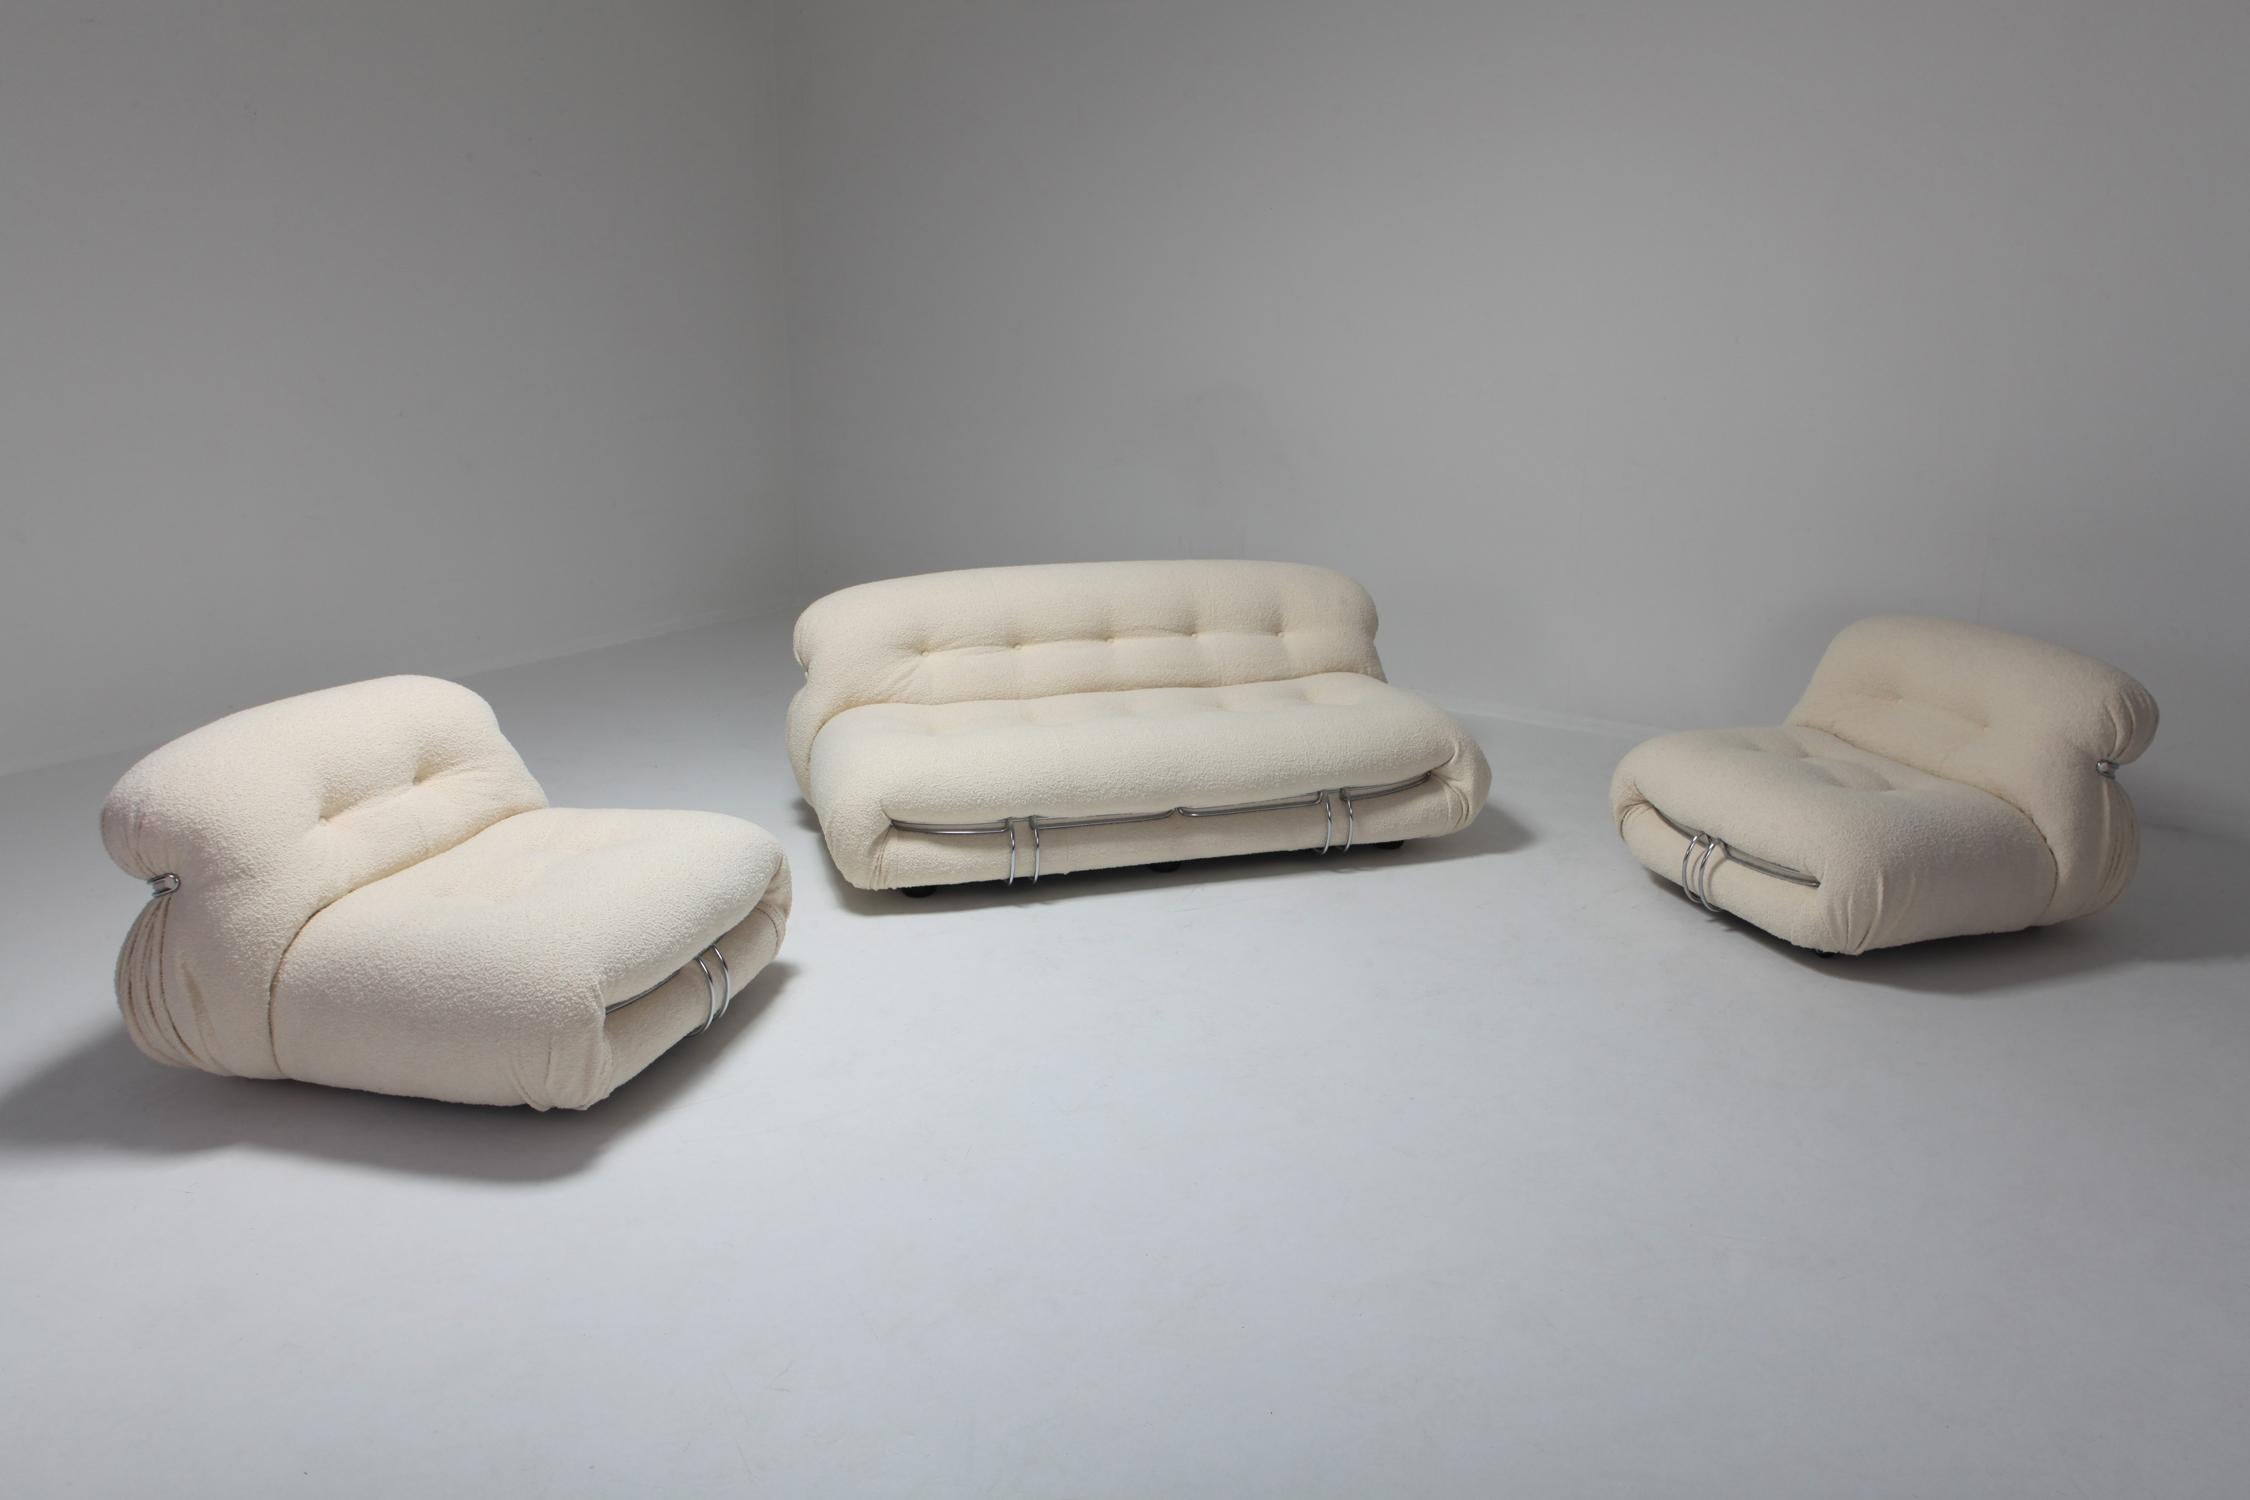 Mid-Century Modern set by Afra and Tobia Scarpa reupholstered in Ivory Bouclé wool.
Manufactured by Cassina in the 1970s, the Soriana collection was meant to express beauty and comfort by using a whole bundle of fabric held by a chrome-plated steel